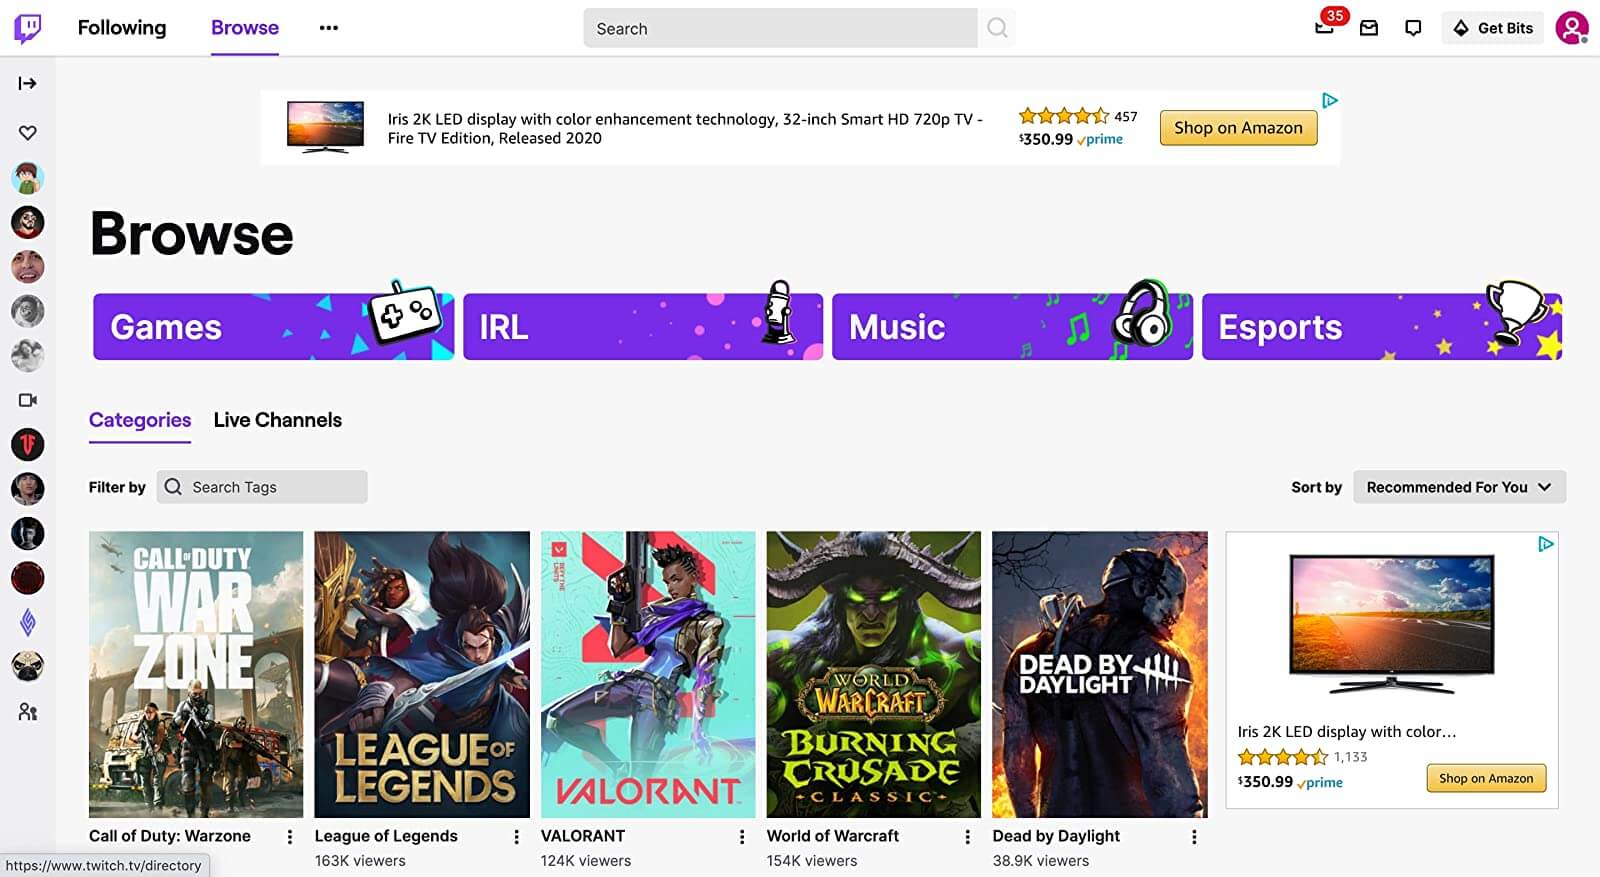 Advertising on Twitch is now easy with Sponsored Display Ads 